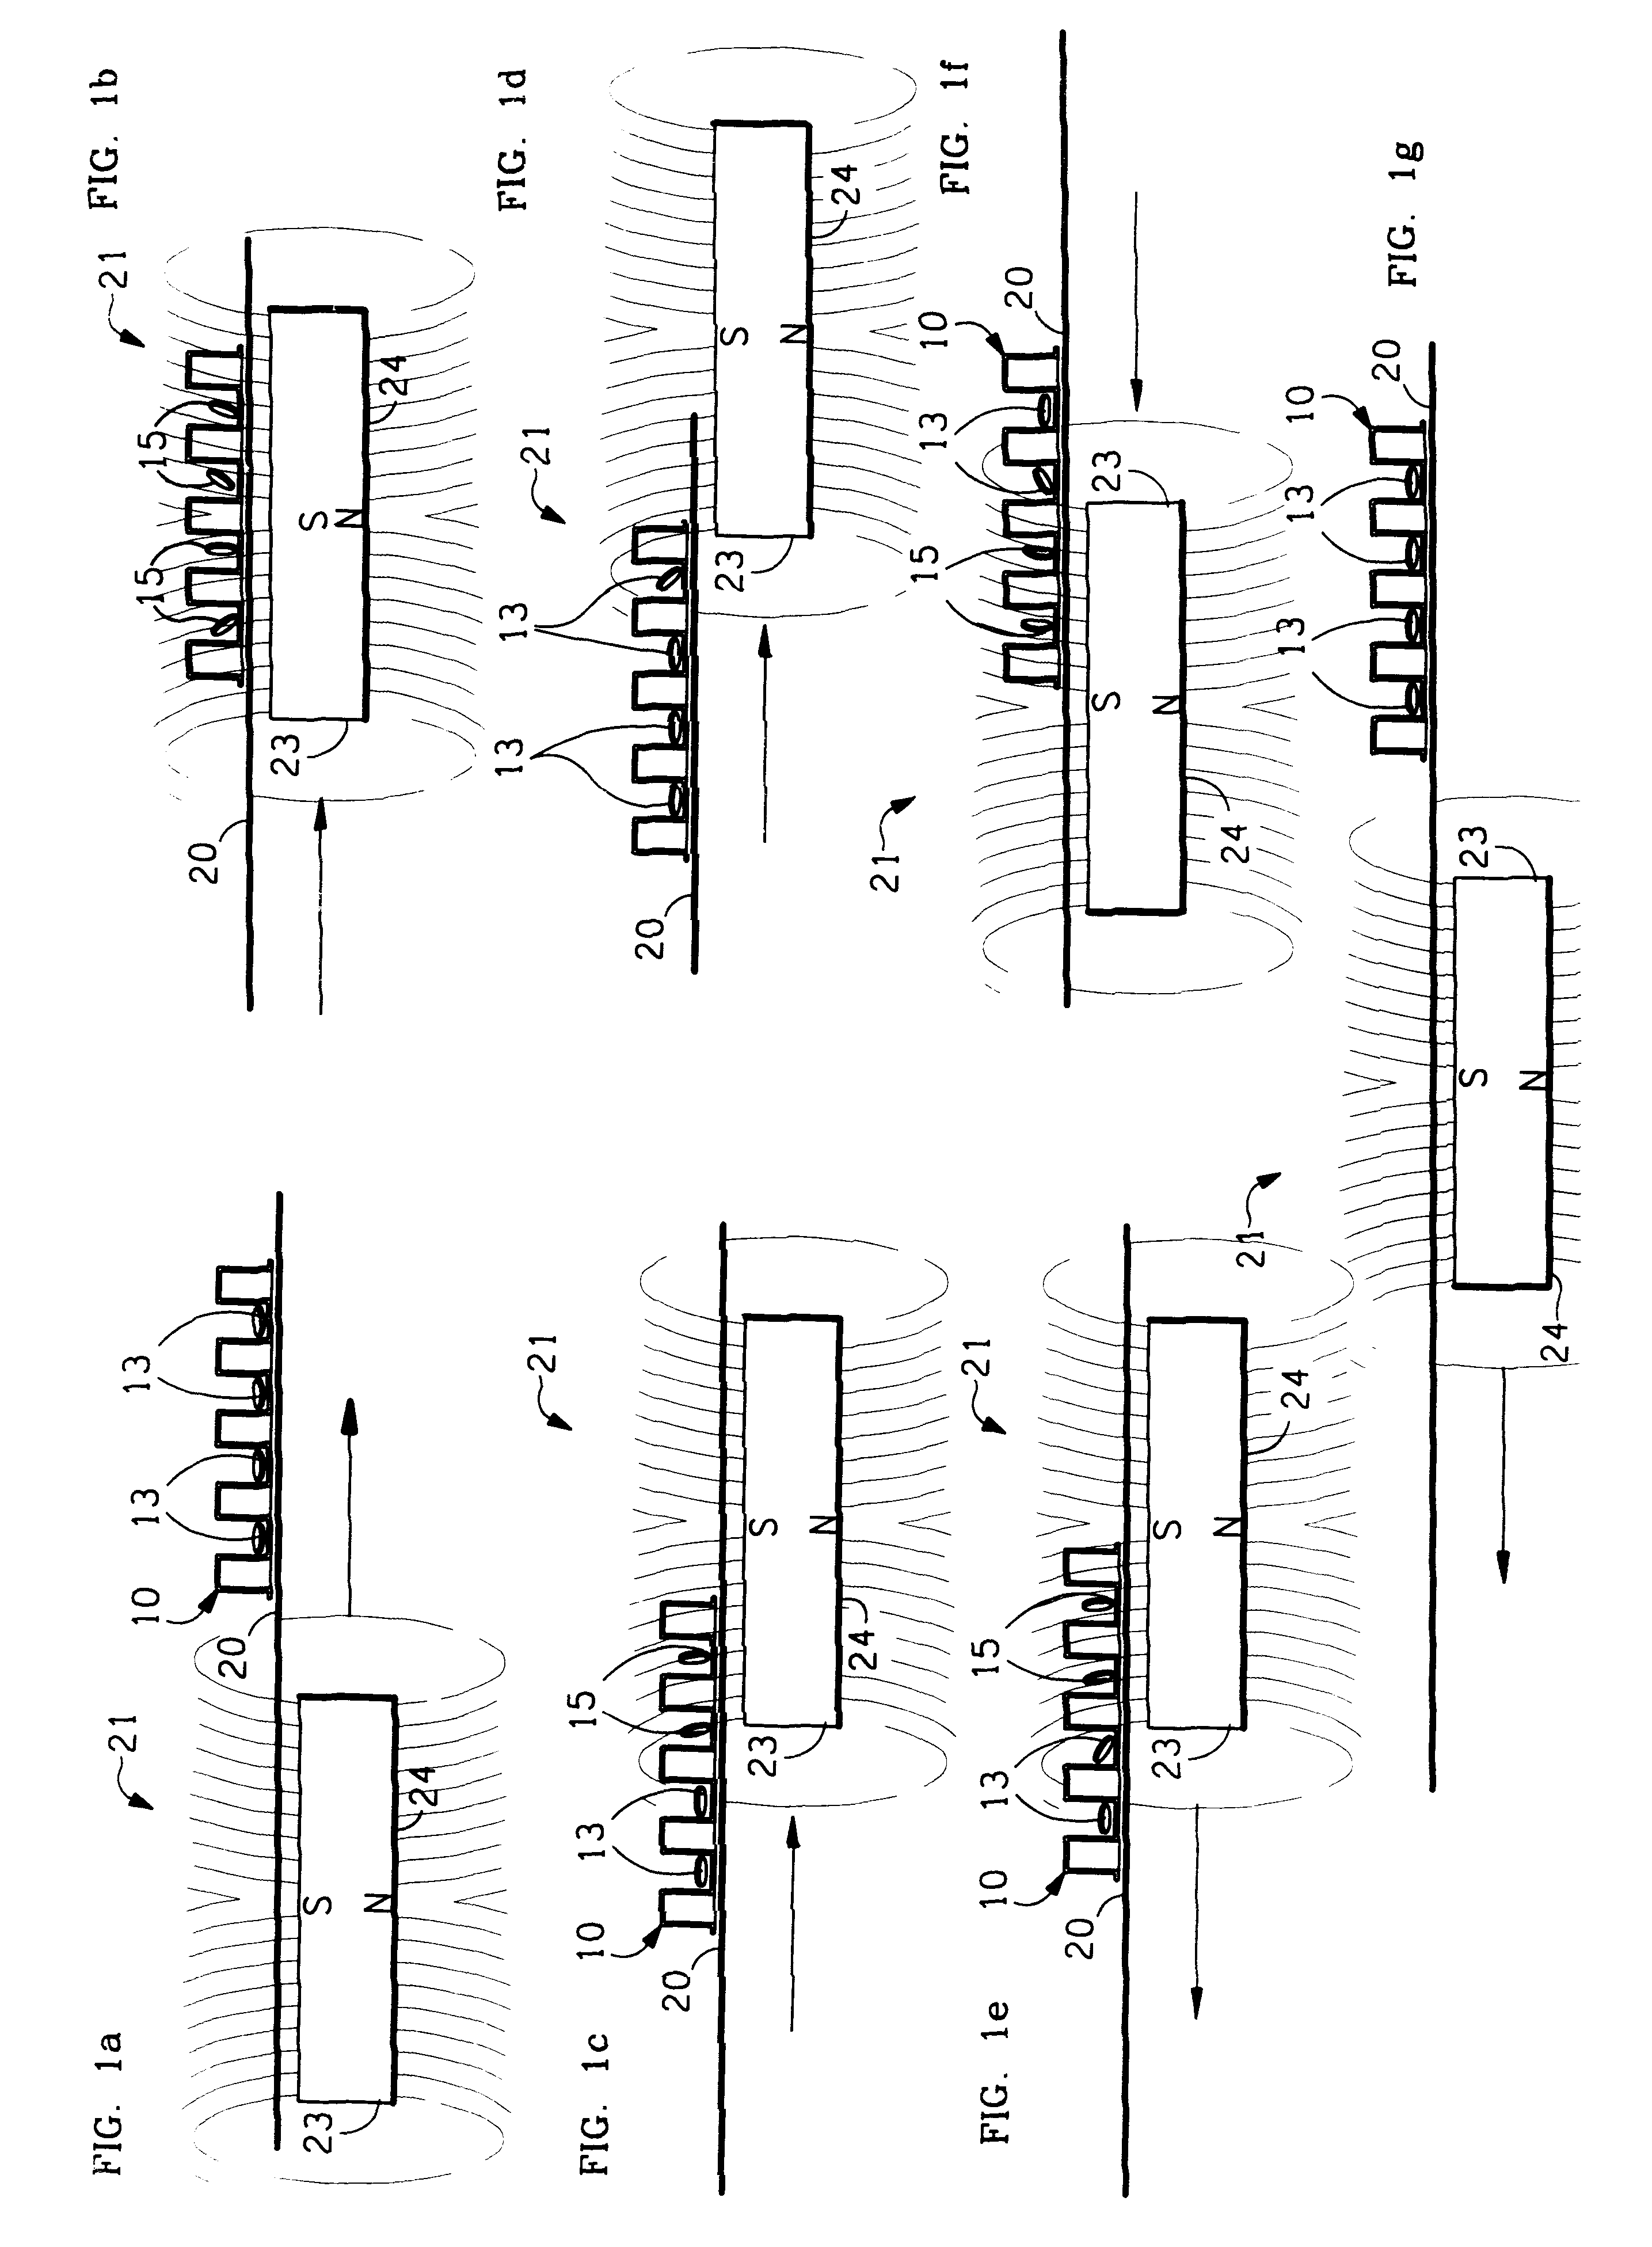 Magnetic tumble stirring method, devices and machines for mixing in vessels